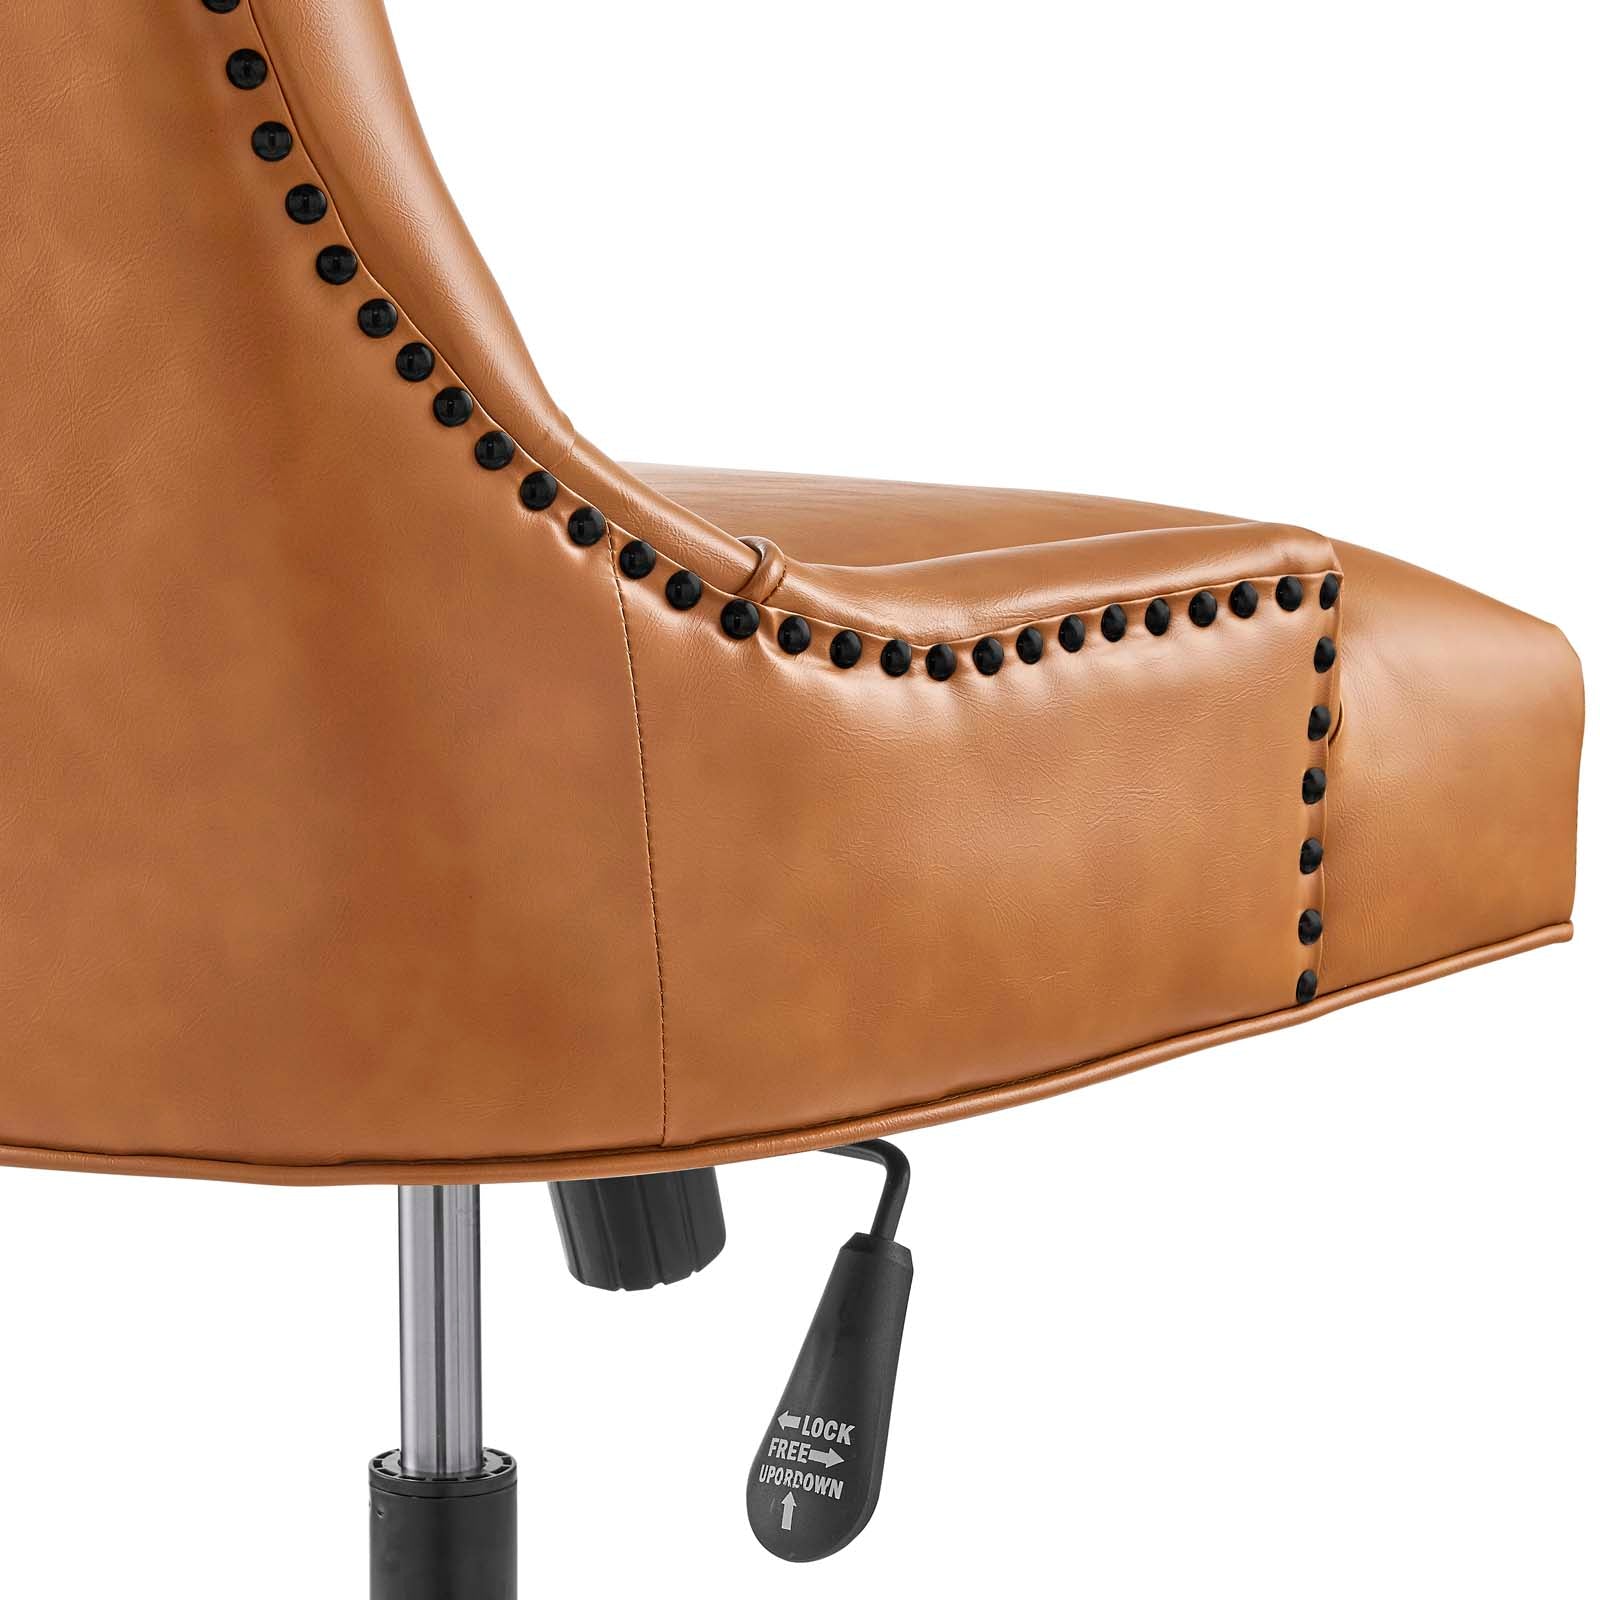 Modway Task Chairs - Regent Tufted Vegan Leather Office Chair Black Tan